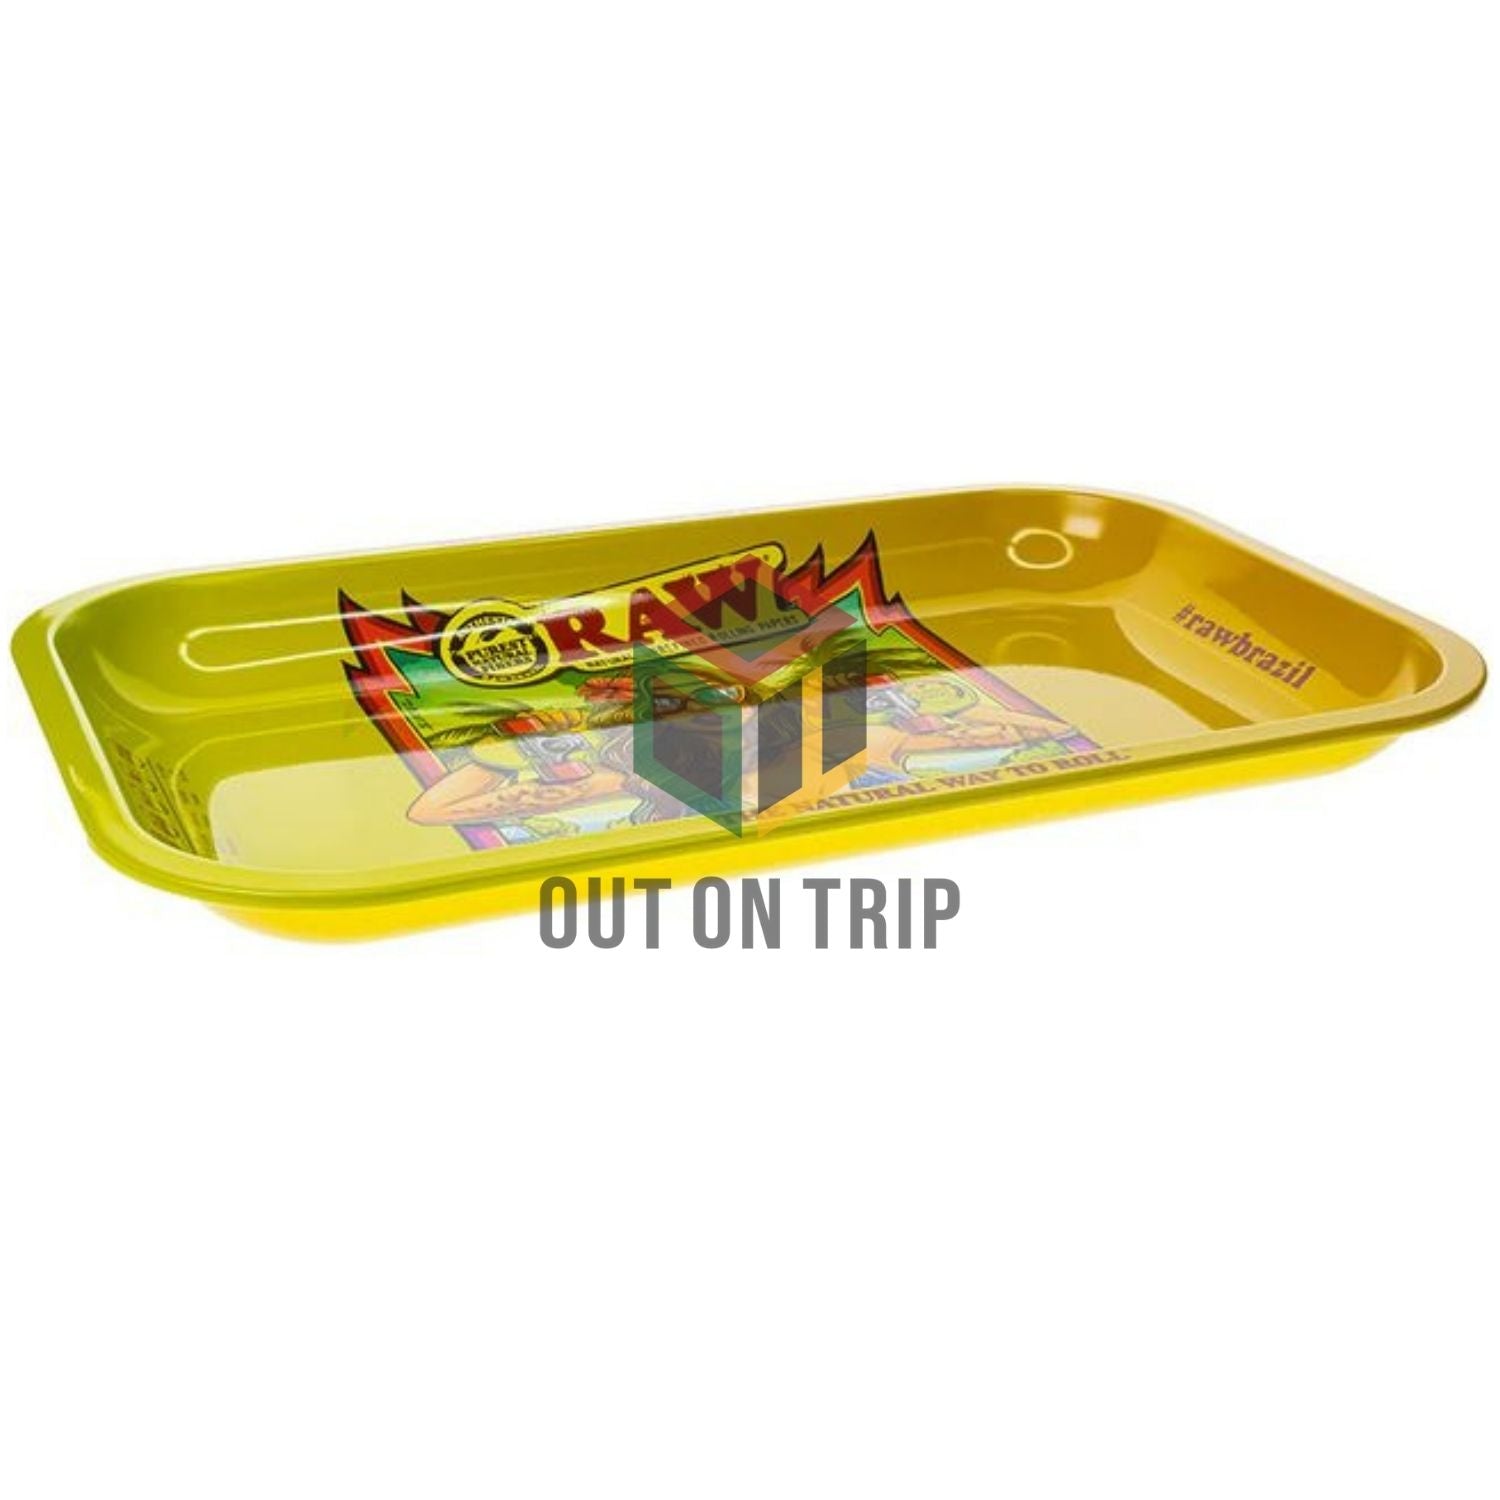 RAW Brazil Rolling Tray - Small Tray - Second Edition